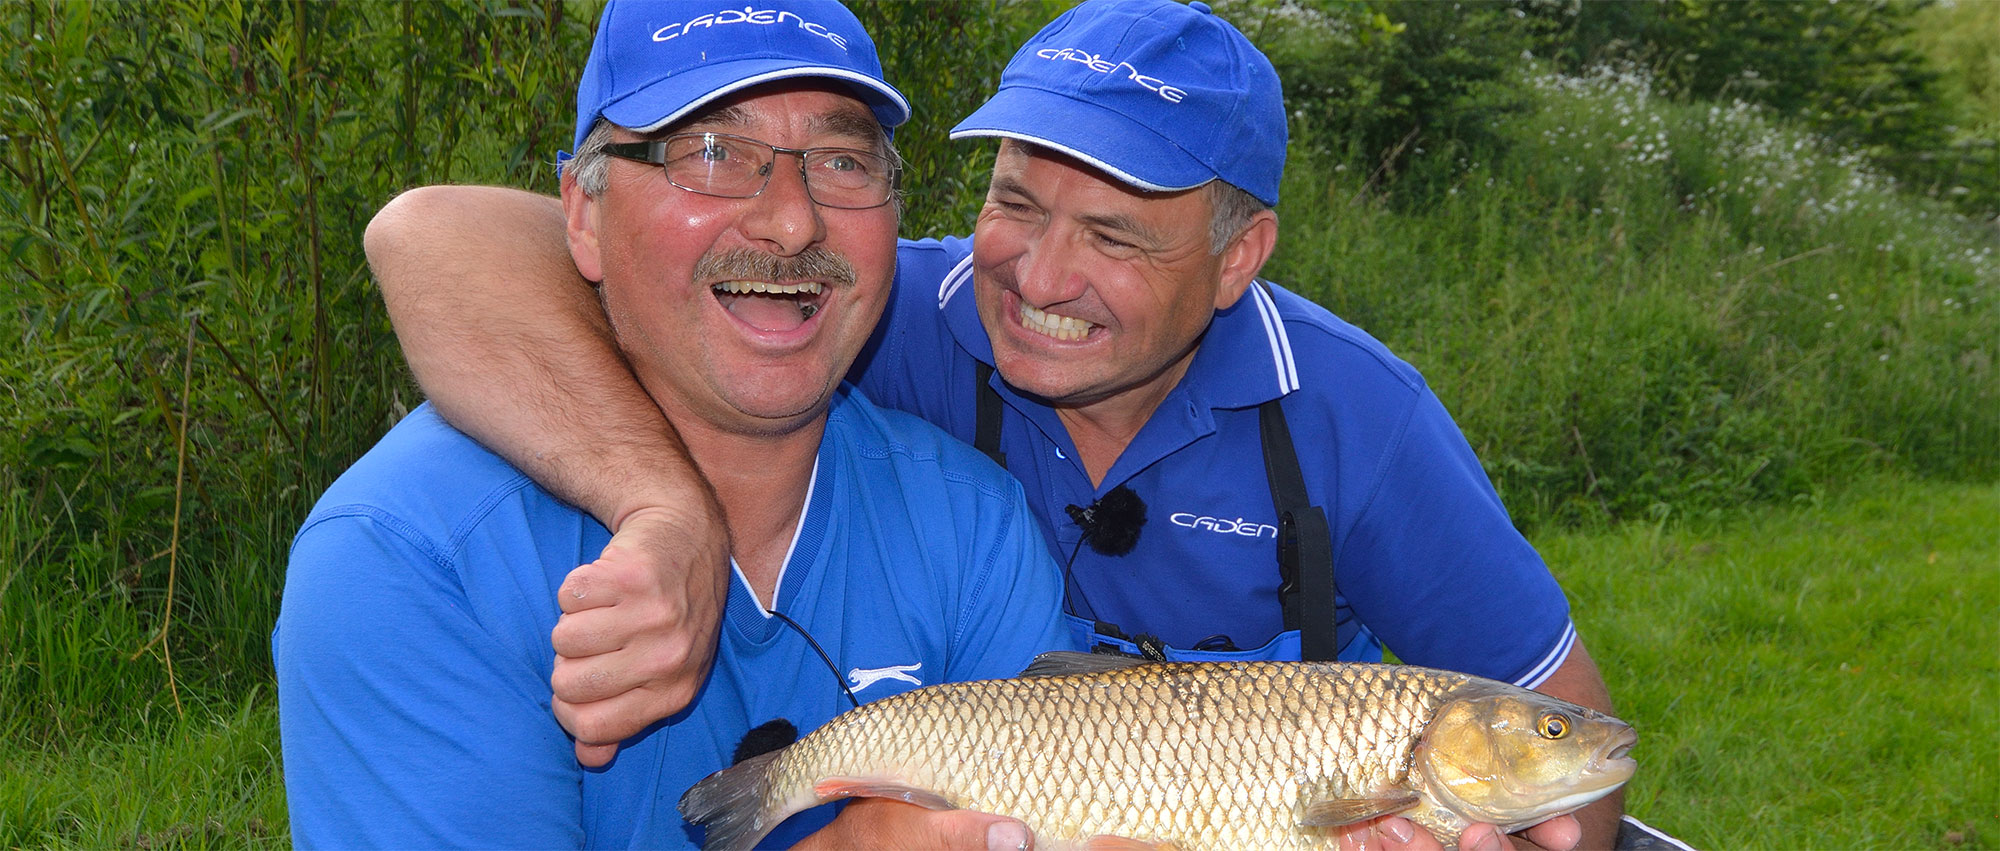 Our Story - Cadence Fishing UK